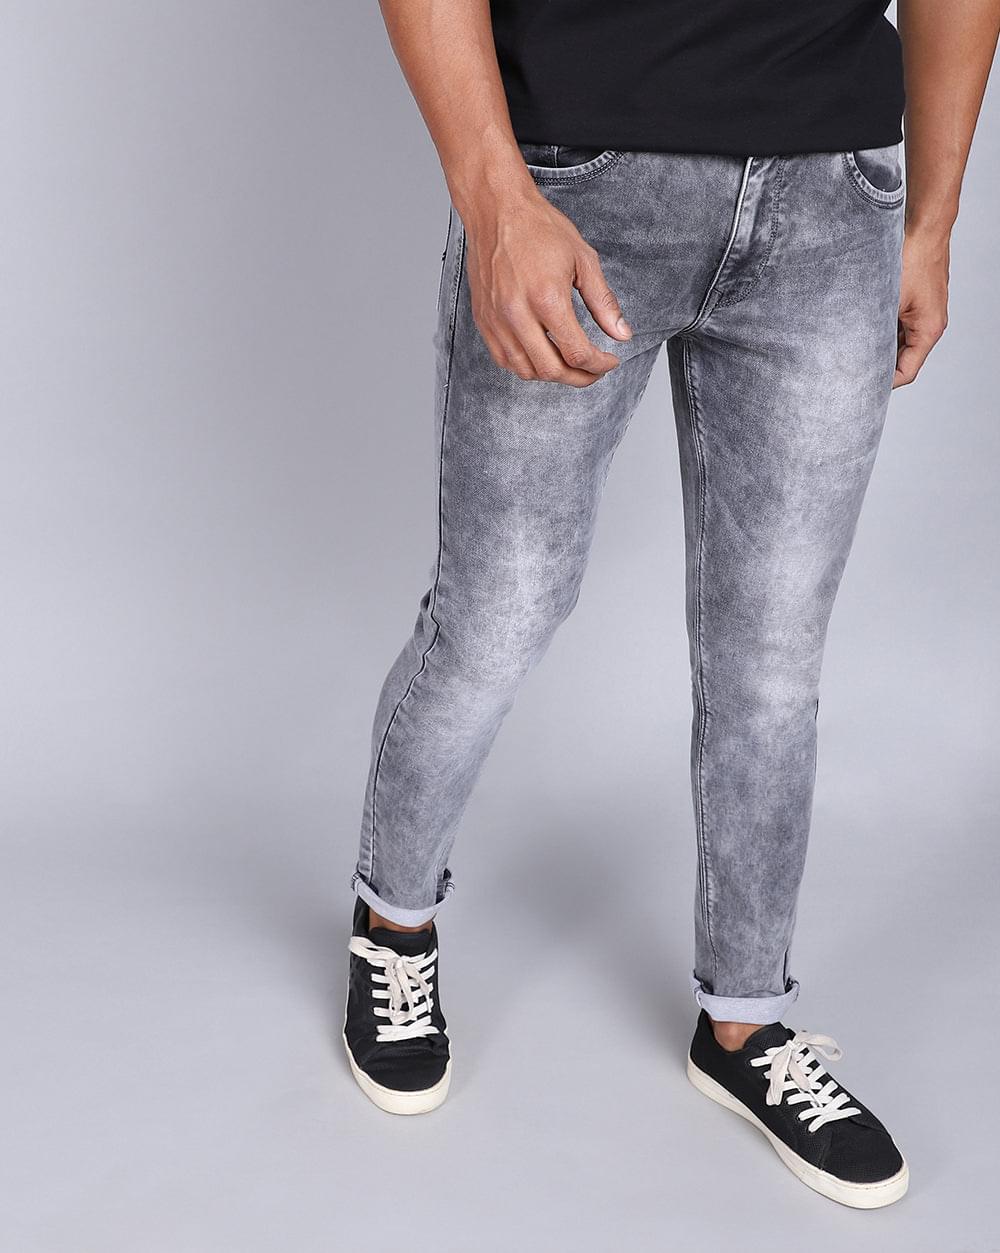 Buy Cool Light Grey Ankle Jeans For Men At Great Price – Rockstar